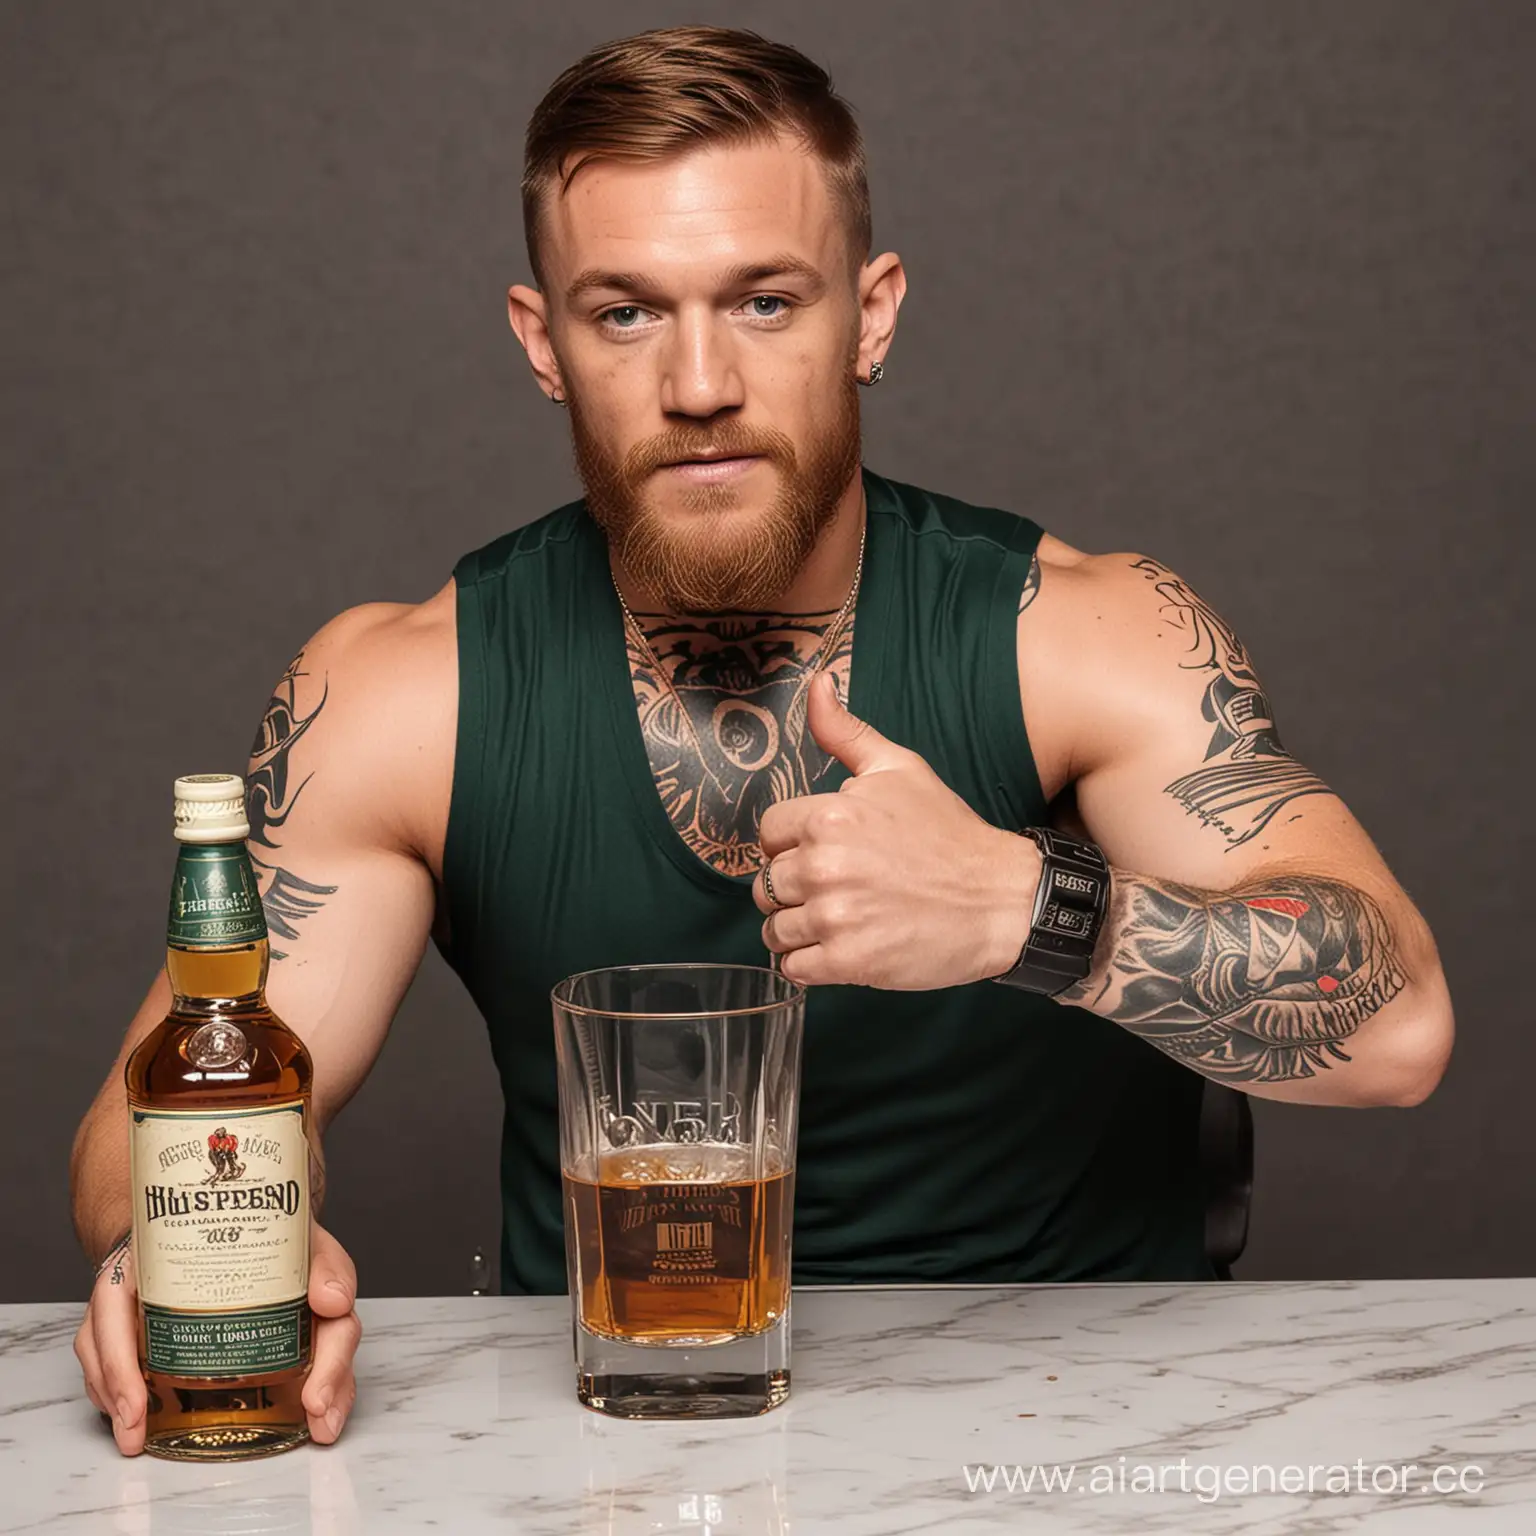 Conor-McGregor-Poses-with-a-Premium-Whiskey-Bottle-for-Elegance-and-Style